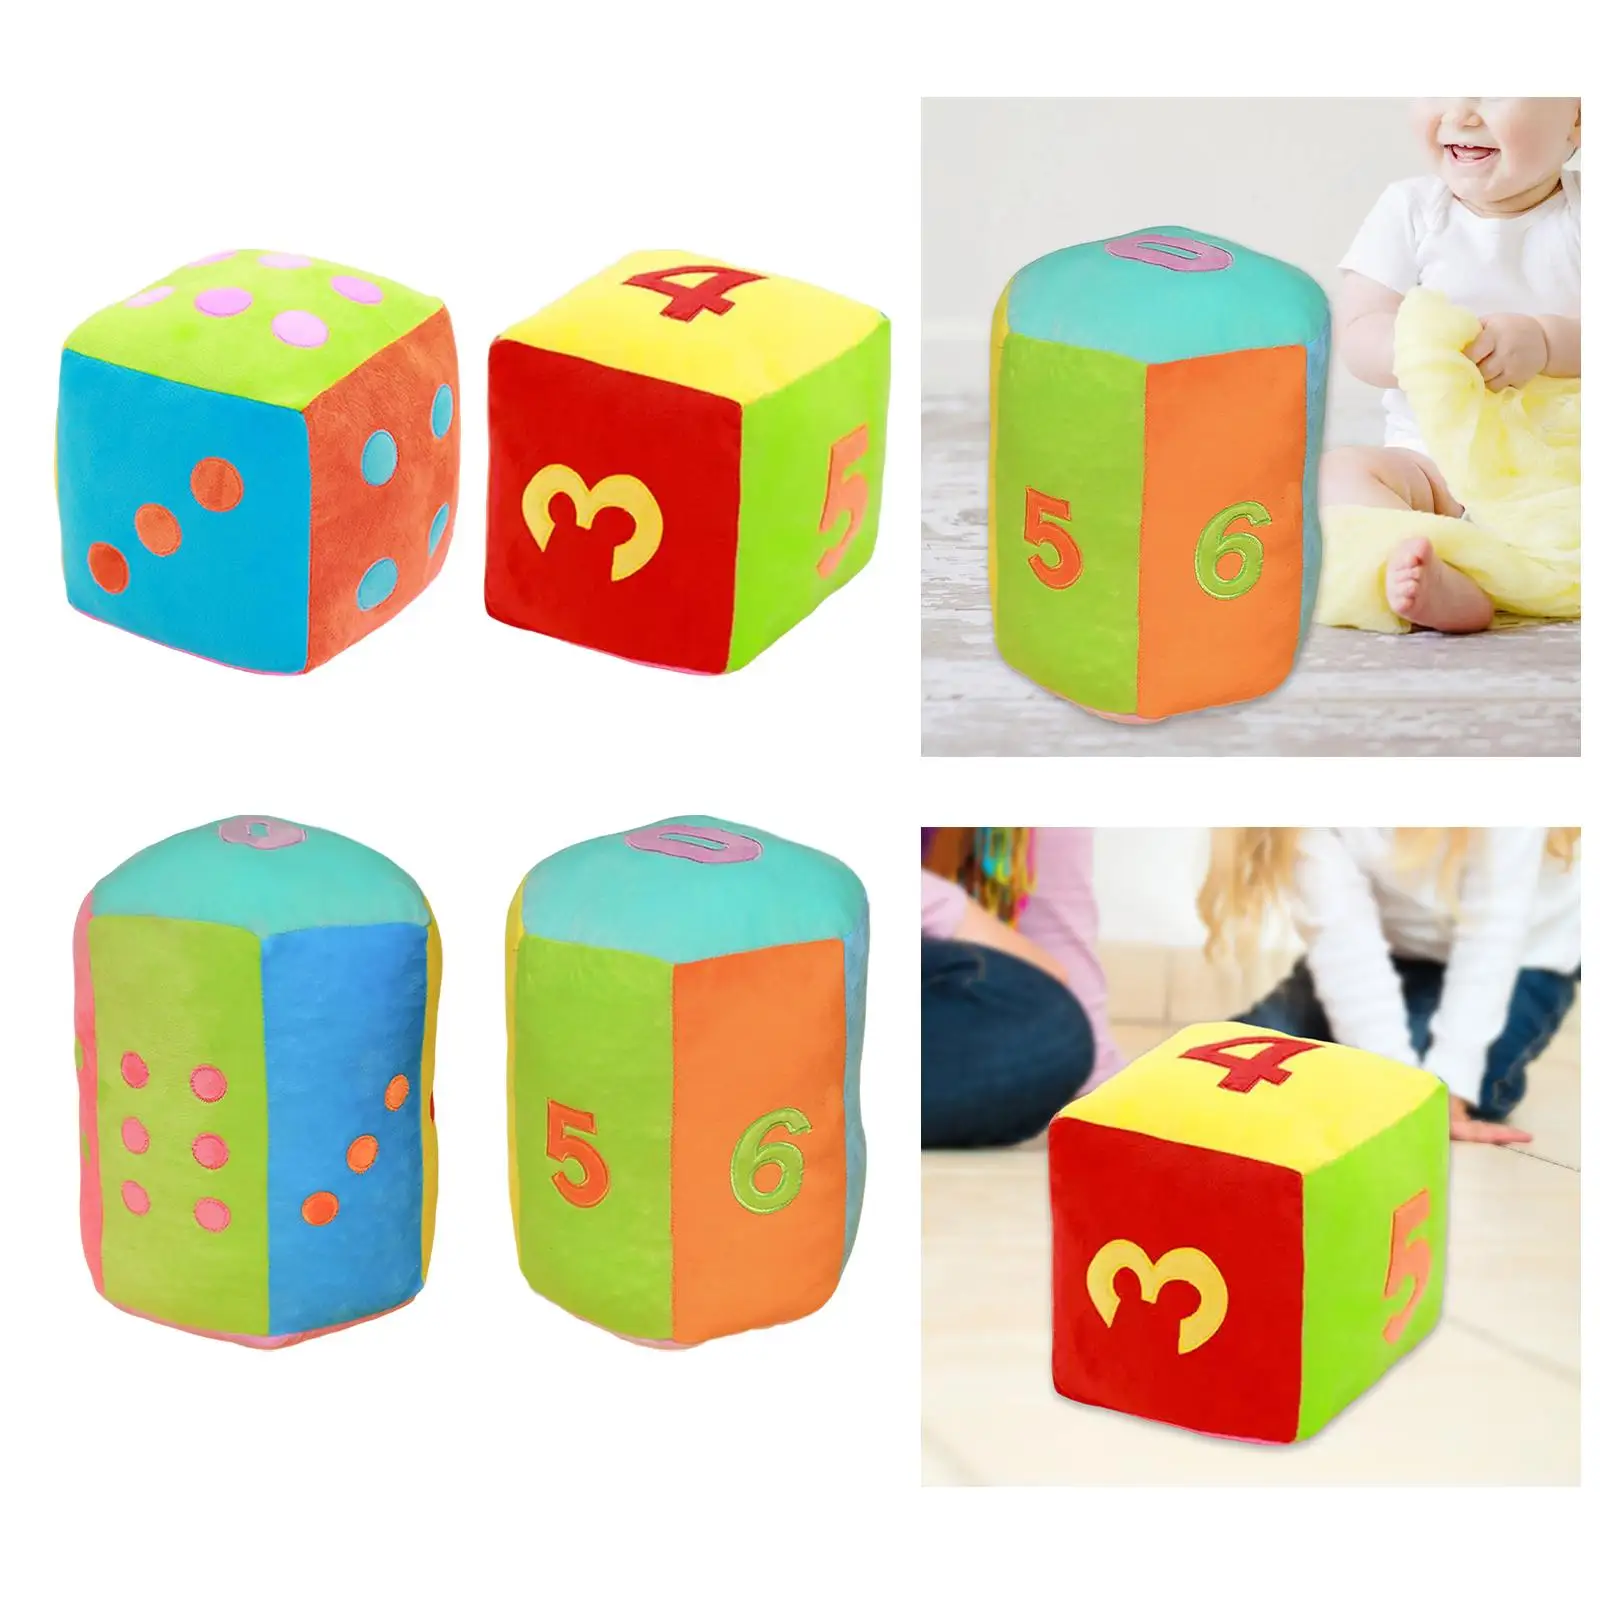 Plush Dice Toy Stuffed Toys Playing Games Party Decorations Educational for Girls Boys